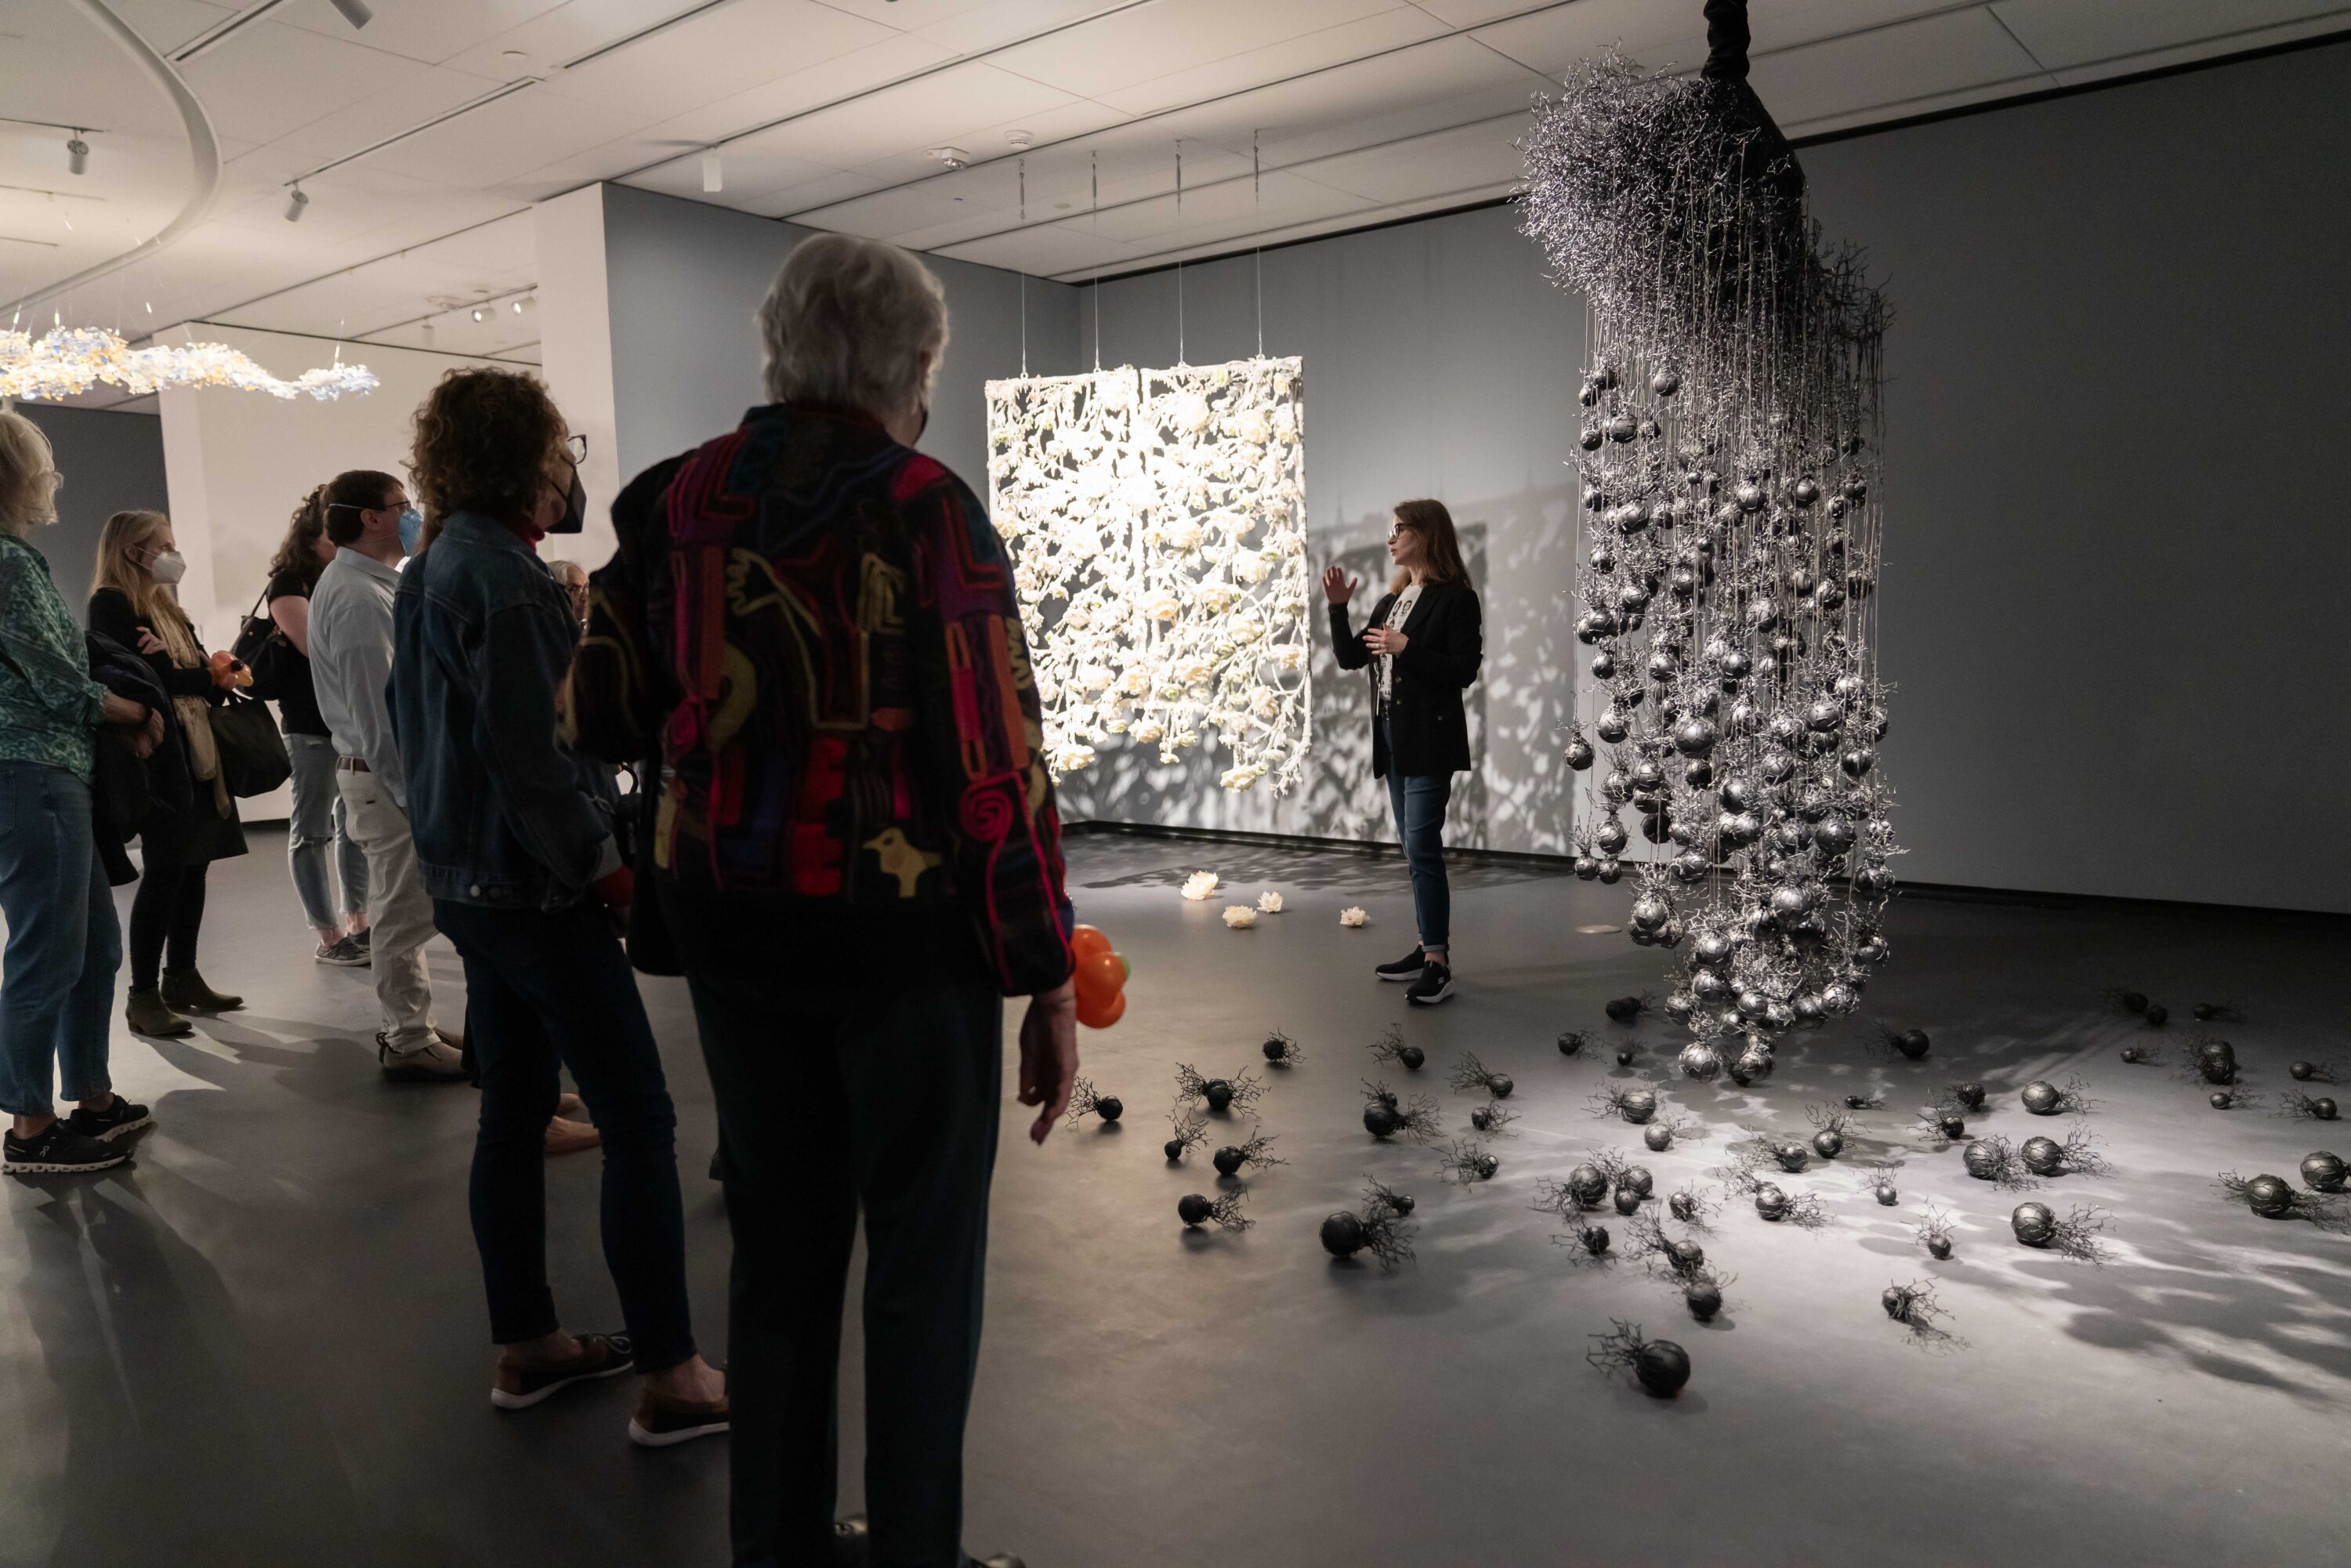 In a dimly-lit museum gallery, a light-skinned woman stands between two large abstract wax sculptures that hang from the ceiling. One is a a white intricate rectangle of connected flowers and vines; the other is a black cluster of fine, vein-like threads and hanging spheres. Below each sculpture, are more of their elements are arranged on the ground. The woman faces a group of visitors who look on.